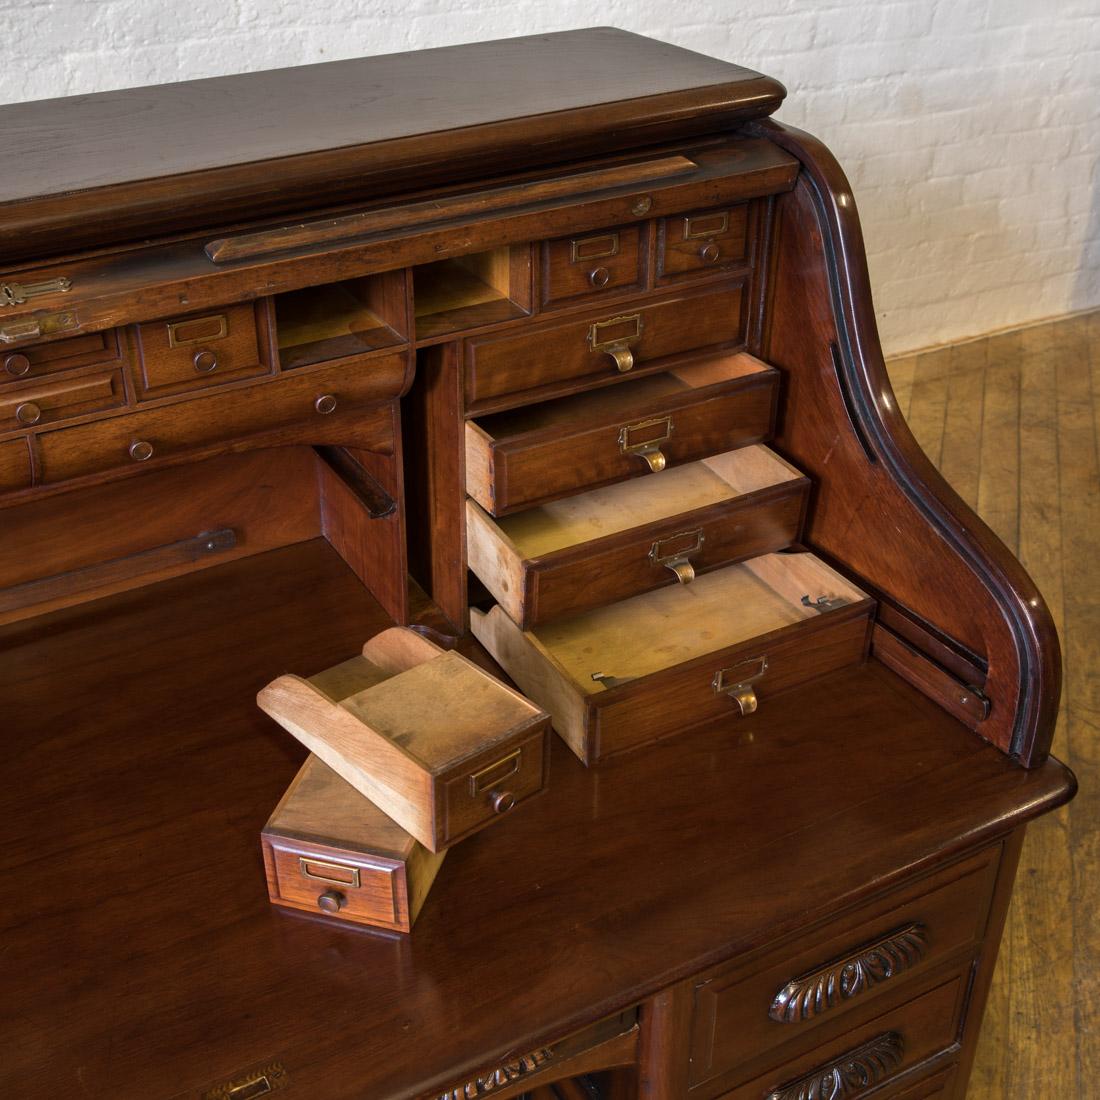 A fine quality solid walnut roll top desk with a fully fitted interior. Externally, the side and rear panels are al fielded (bevelled) and to the front the drawers have superb carved handles, below two brushing slides. The tambour opens and closes